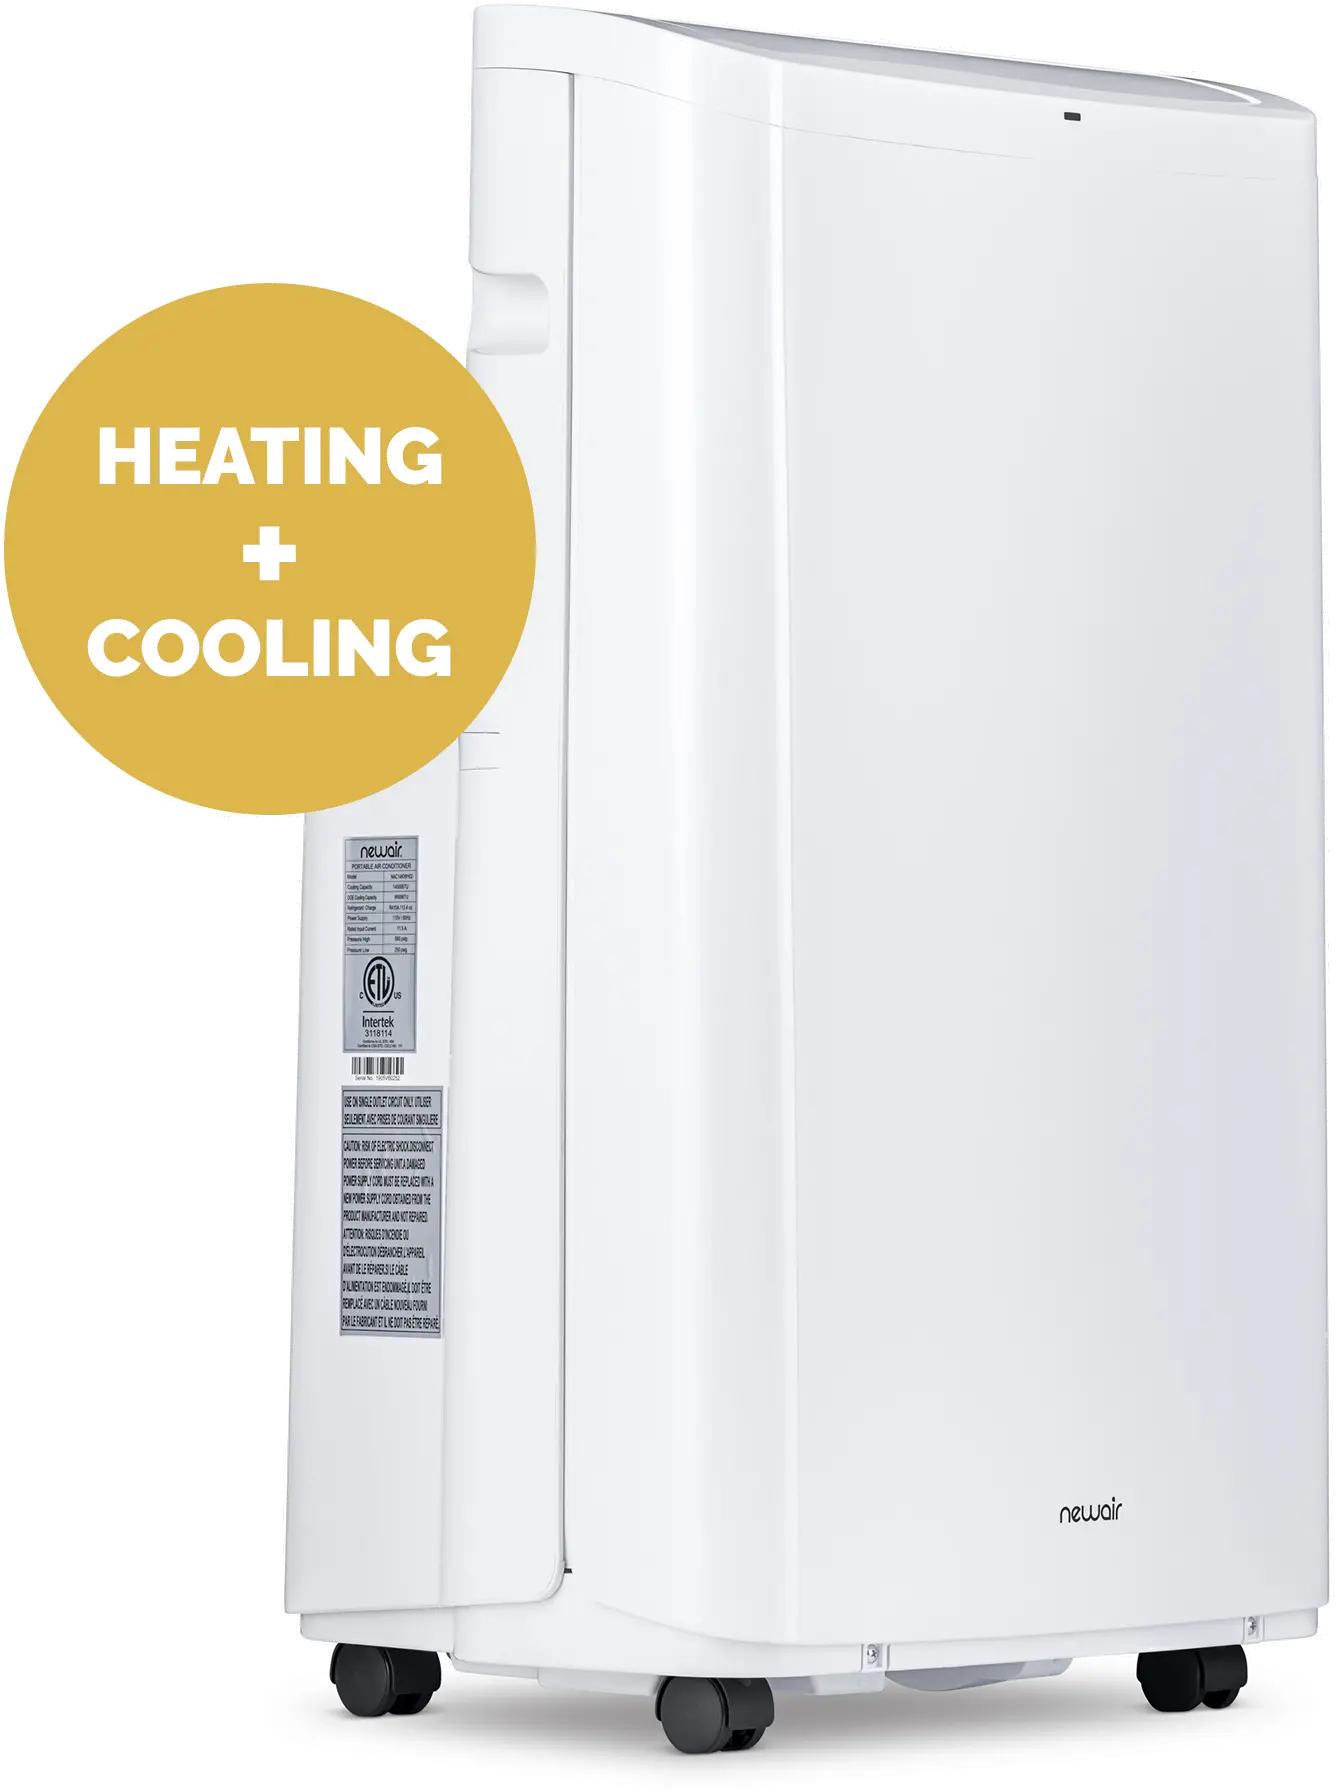 New Air 14, 000 BTU Portable Air Conditioner and Heater